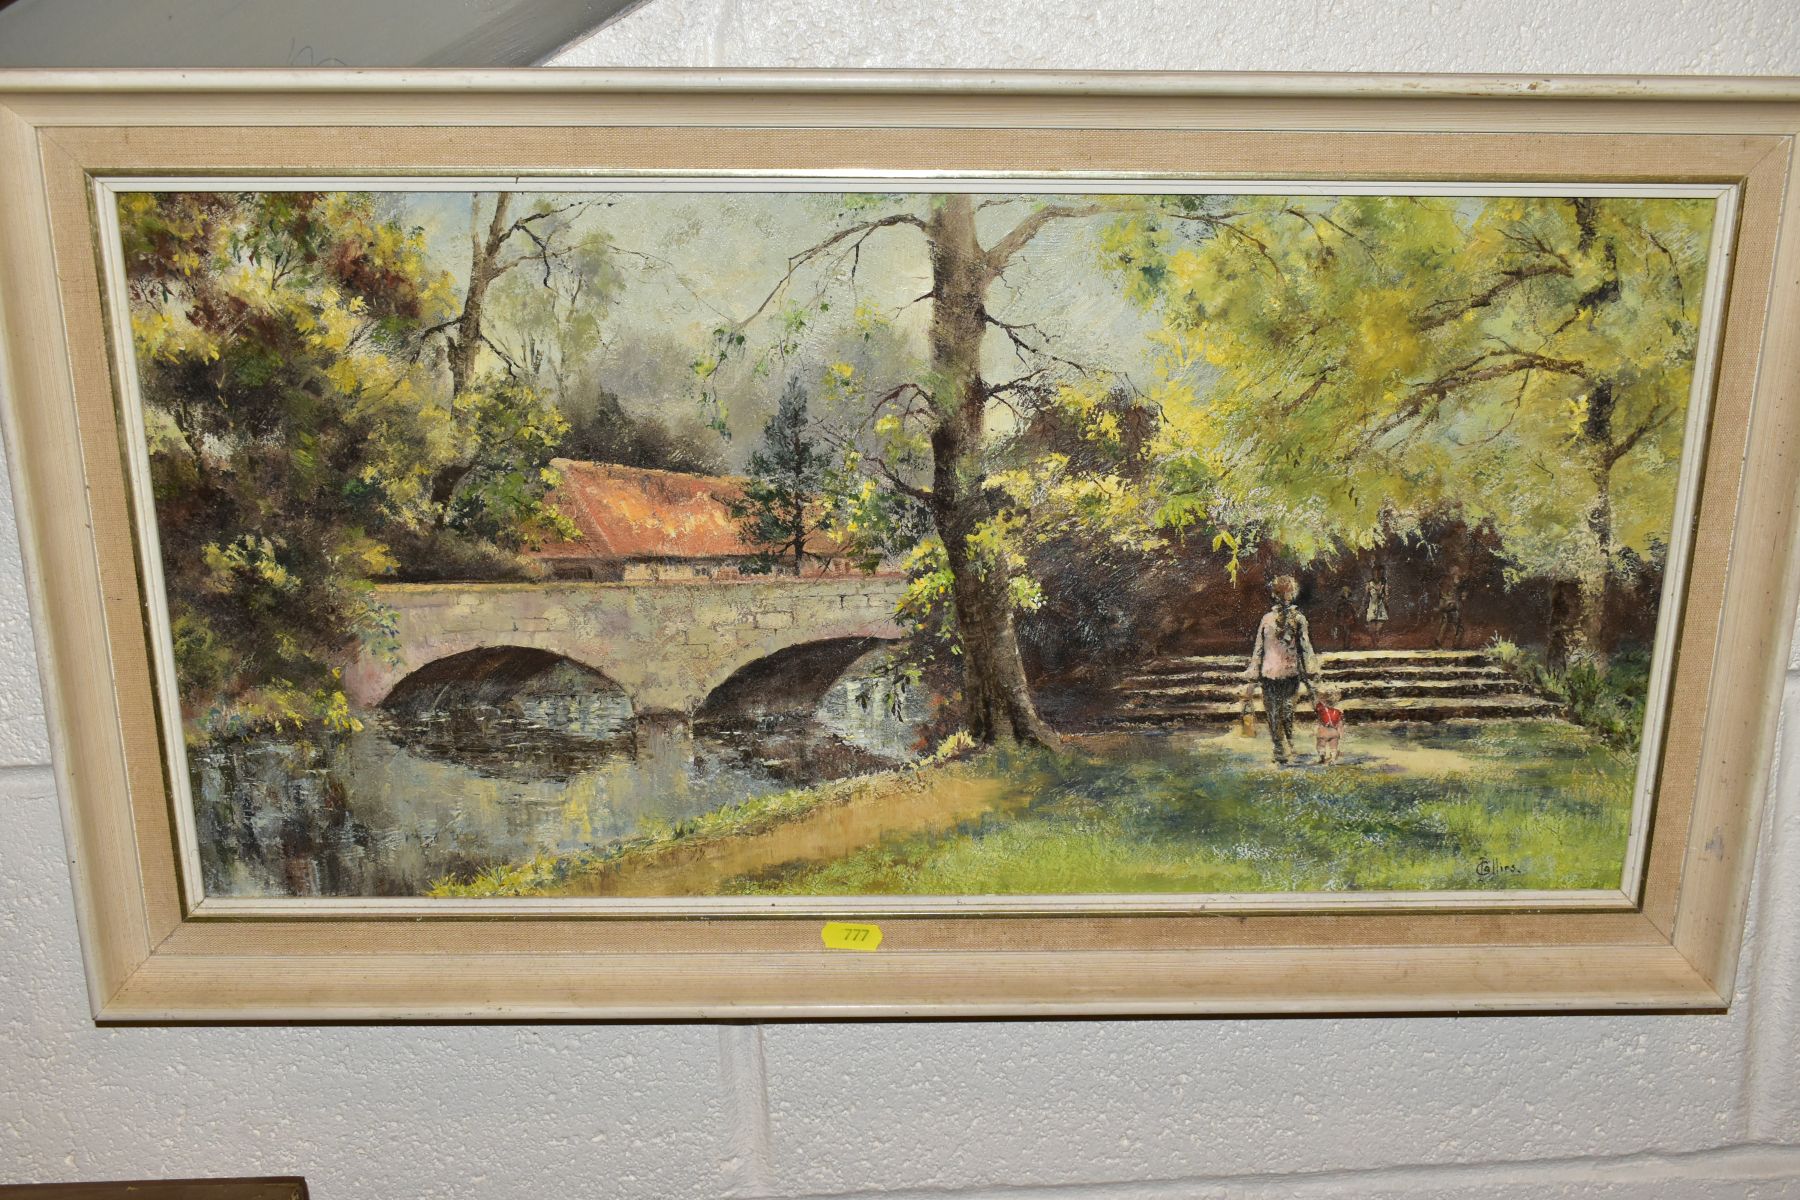 PAINTING AND PRINTS etc, to include 'Markeaton Park' by I.F. Collins, oil on board, size 29cm x - Image 2 of 5